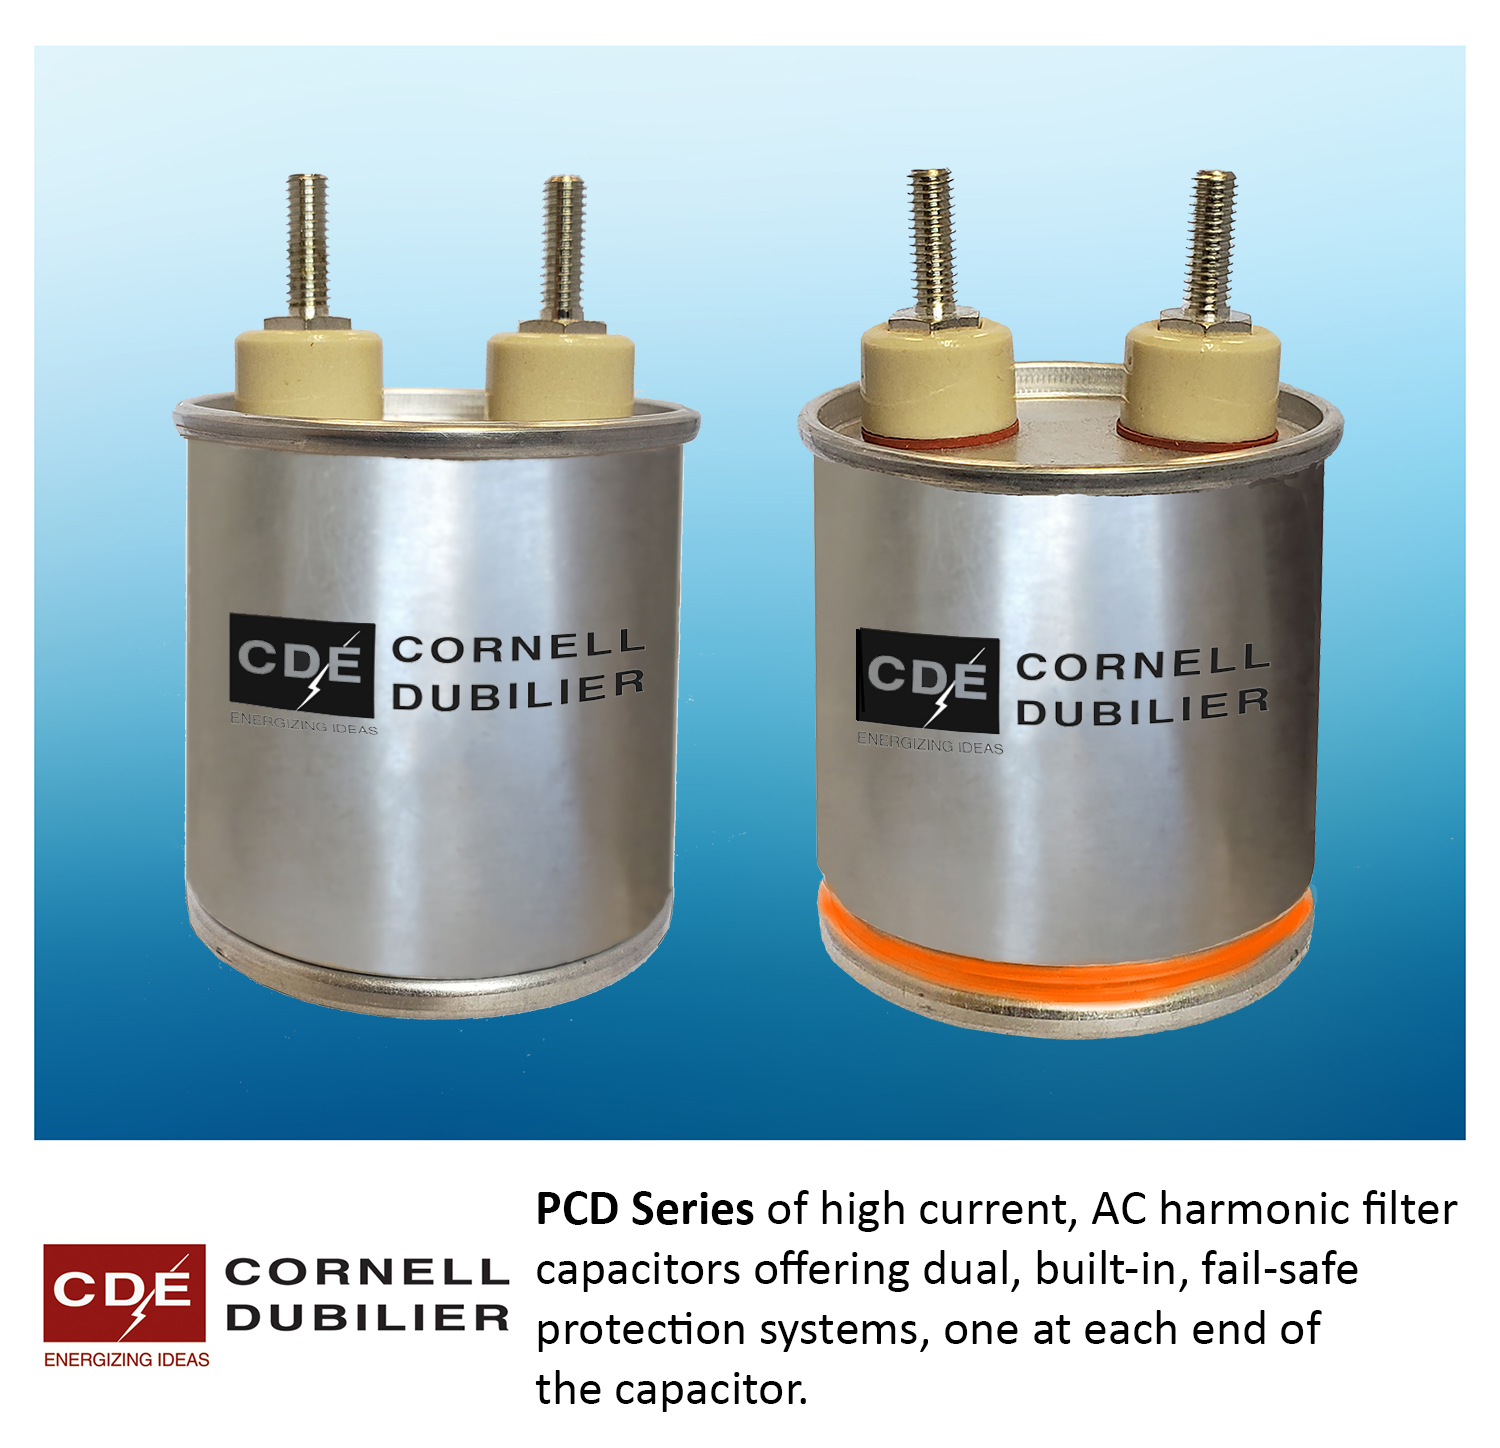 AC Harmonic Filter Capacitors Offer Built-in Protection Systems